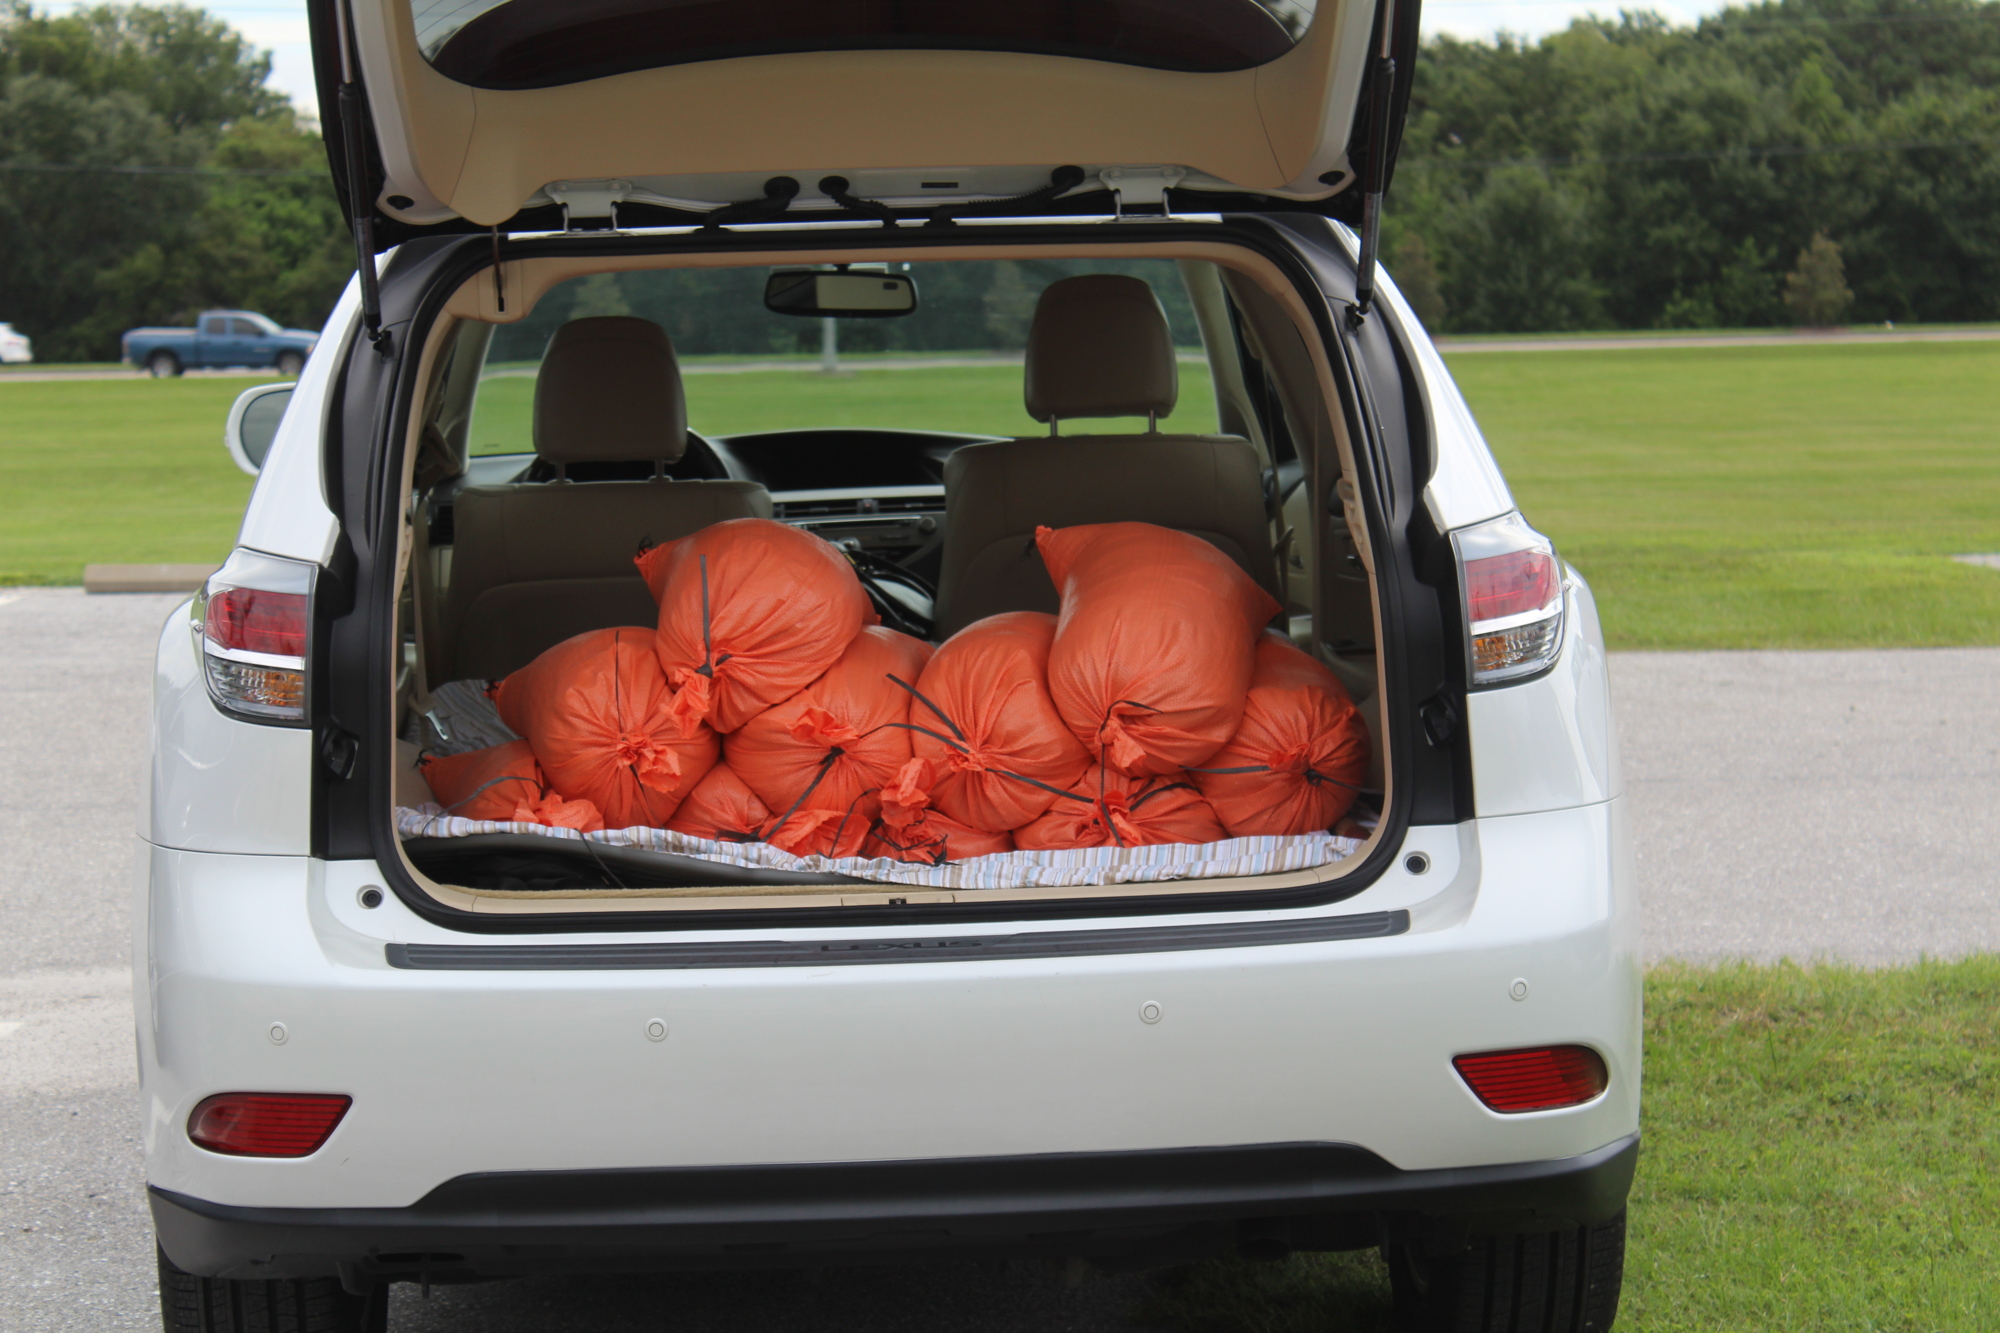 A car sits loaded with sandbags in preparation for Hurricane Irma.